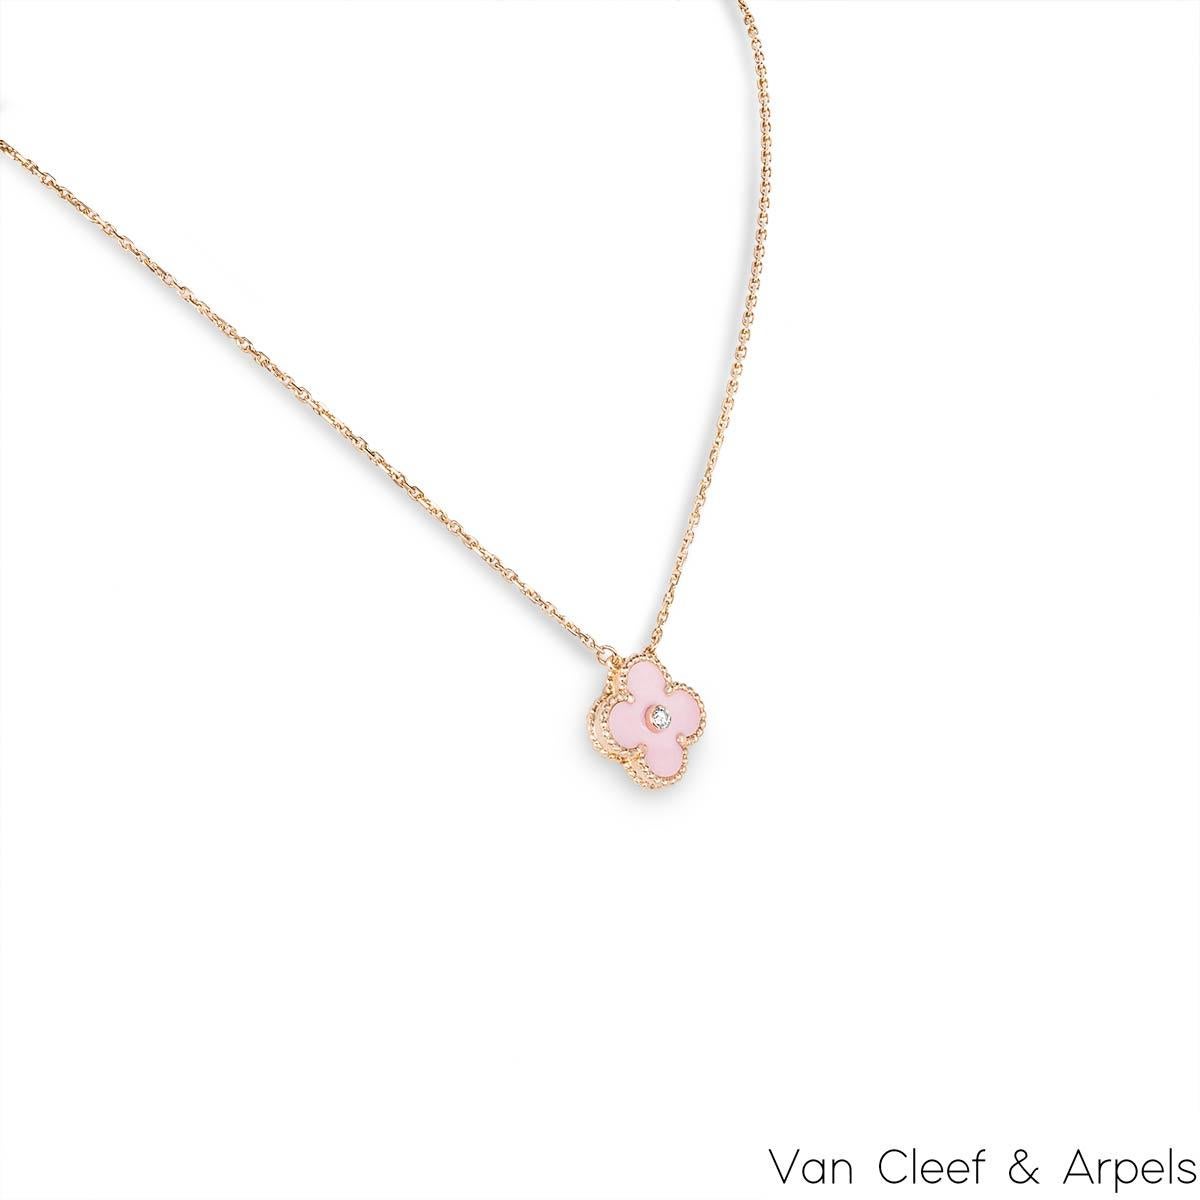 A limited edition 18k rose gold pink porcelain and diamond Van Cleef & Arpels Vintage Alhambra pendant from the 2015 Holiday collection. The pendant features a beaded edge 4 leaf clover motif with a Pink Sèvres porcelain inlay. Van Cleef & Arpels